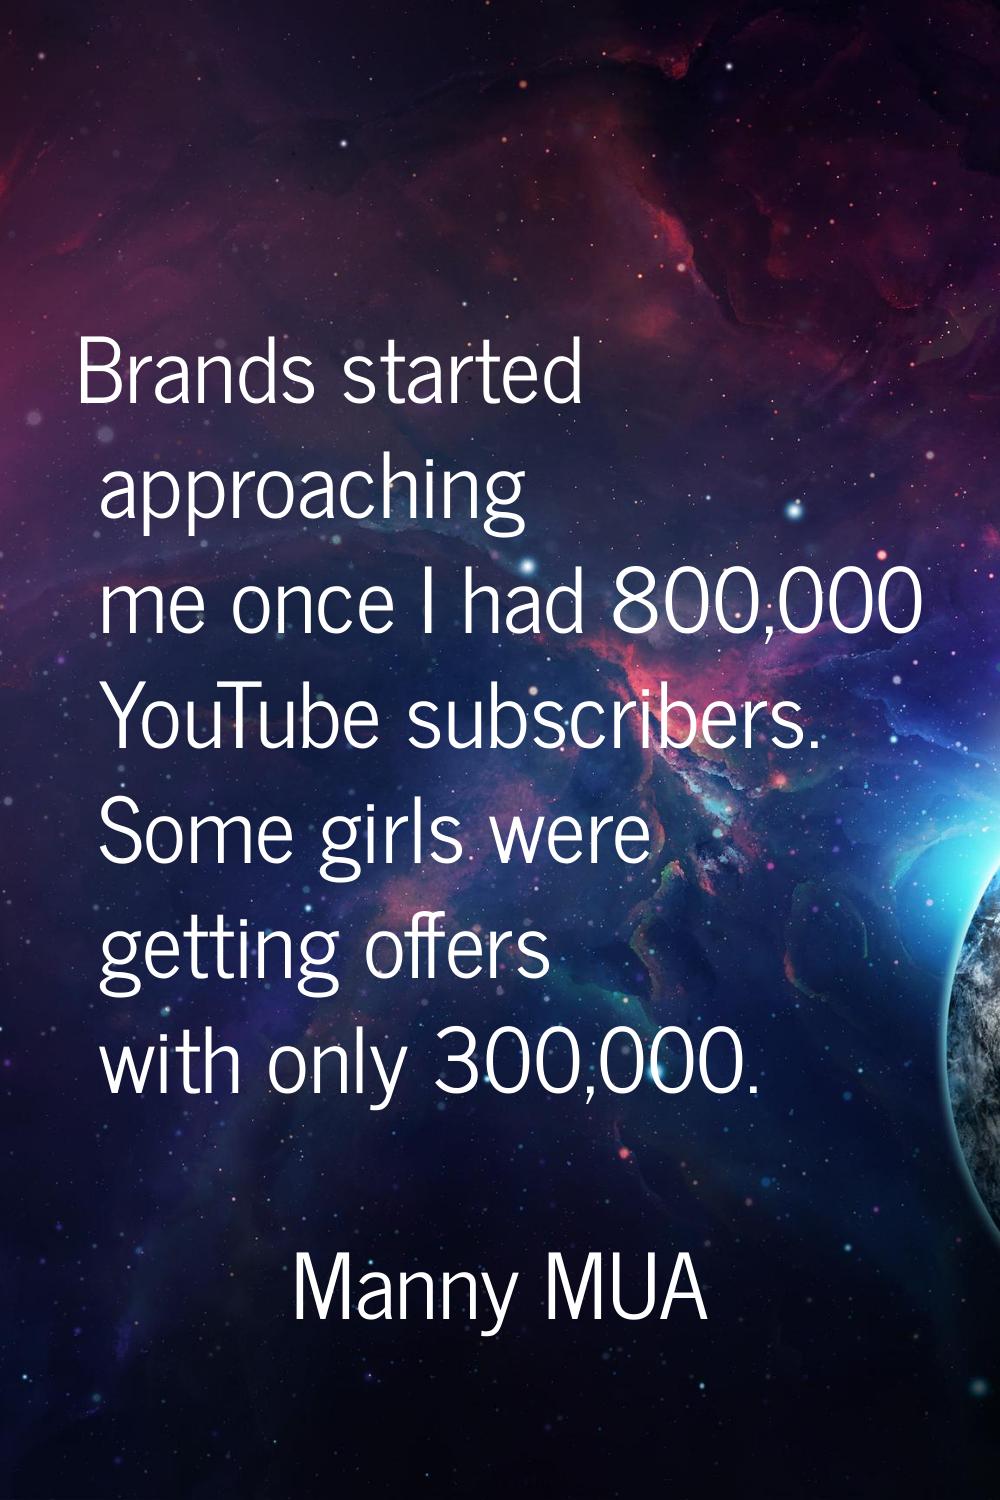 Brands started approaching me once I had 800,000 YouTube subscribers. Some girls were getting offer